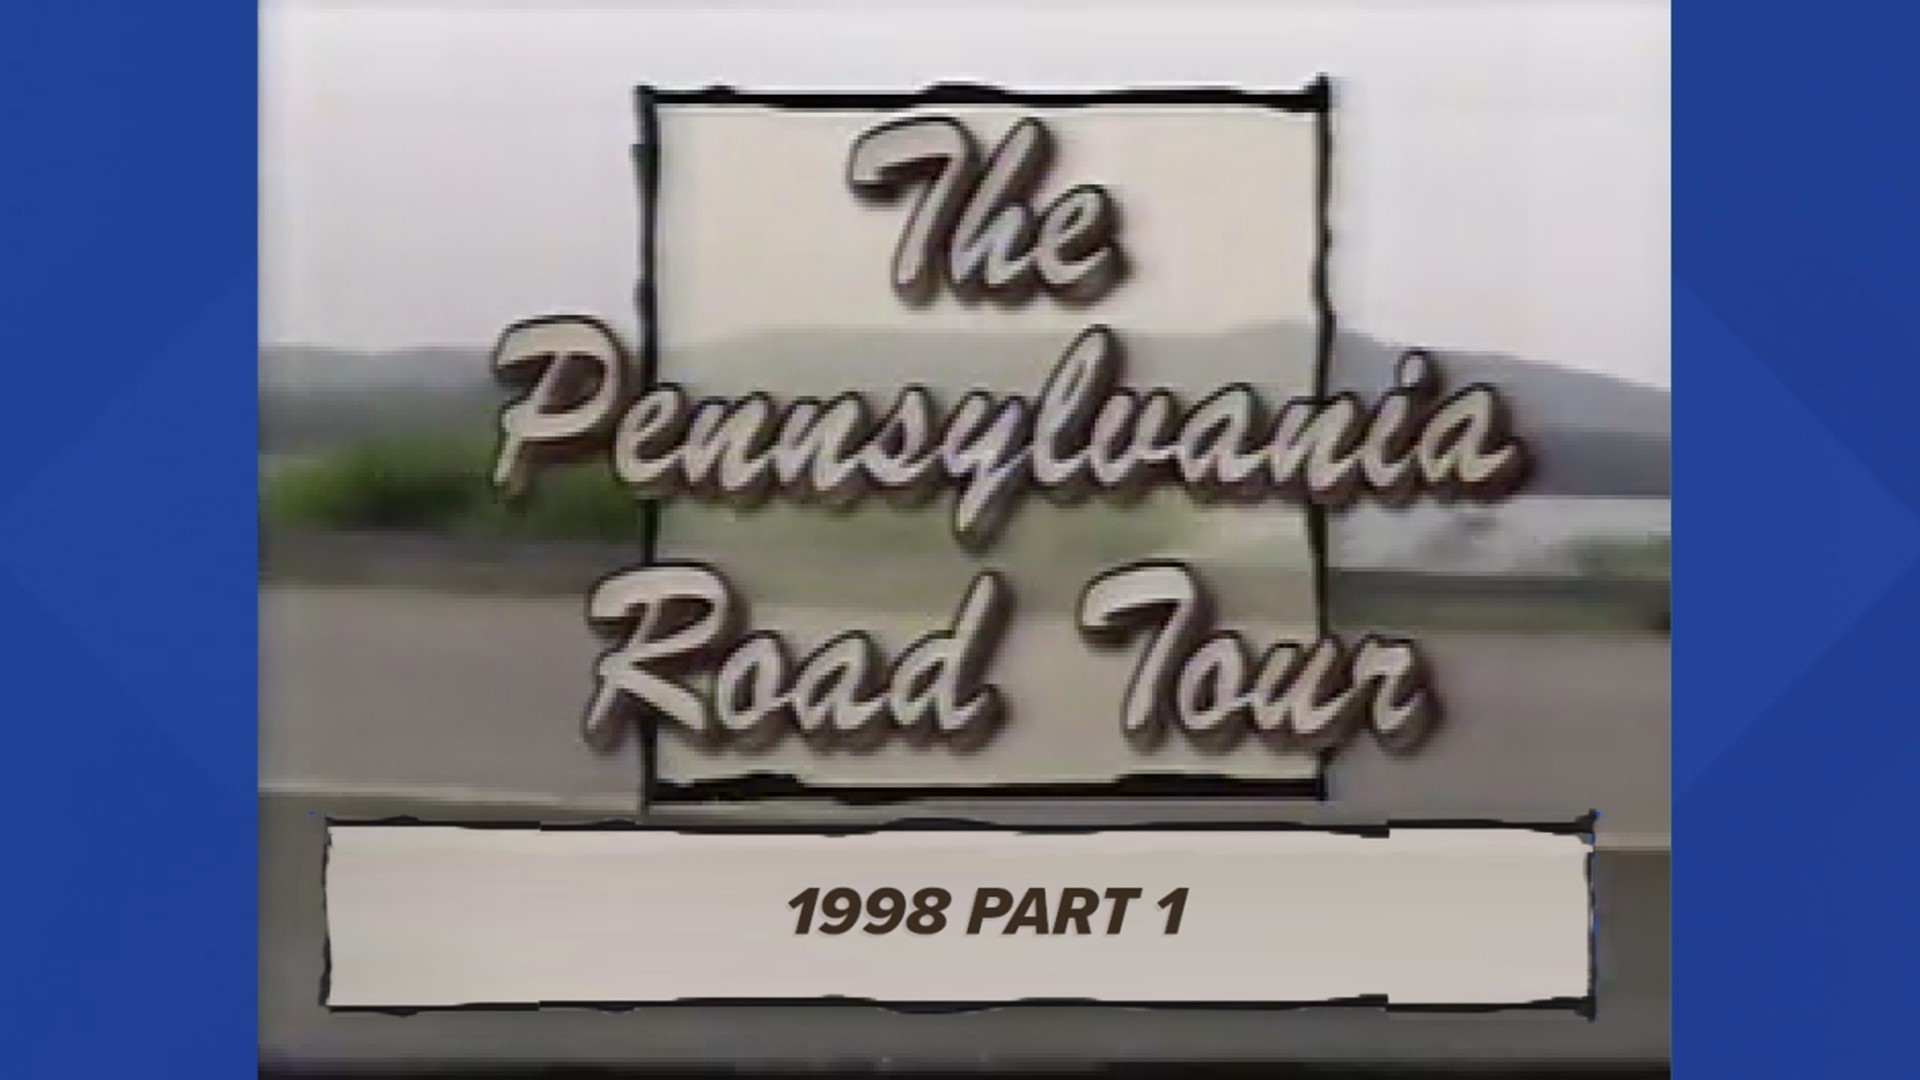 Mike Stevens is rolling down the Pennsylvania Road across the Commonwealth again in 1998.